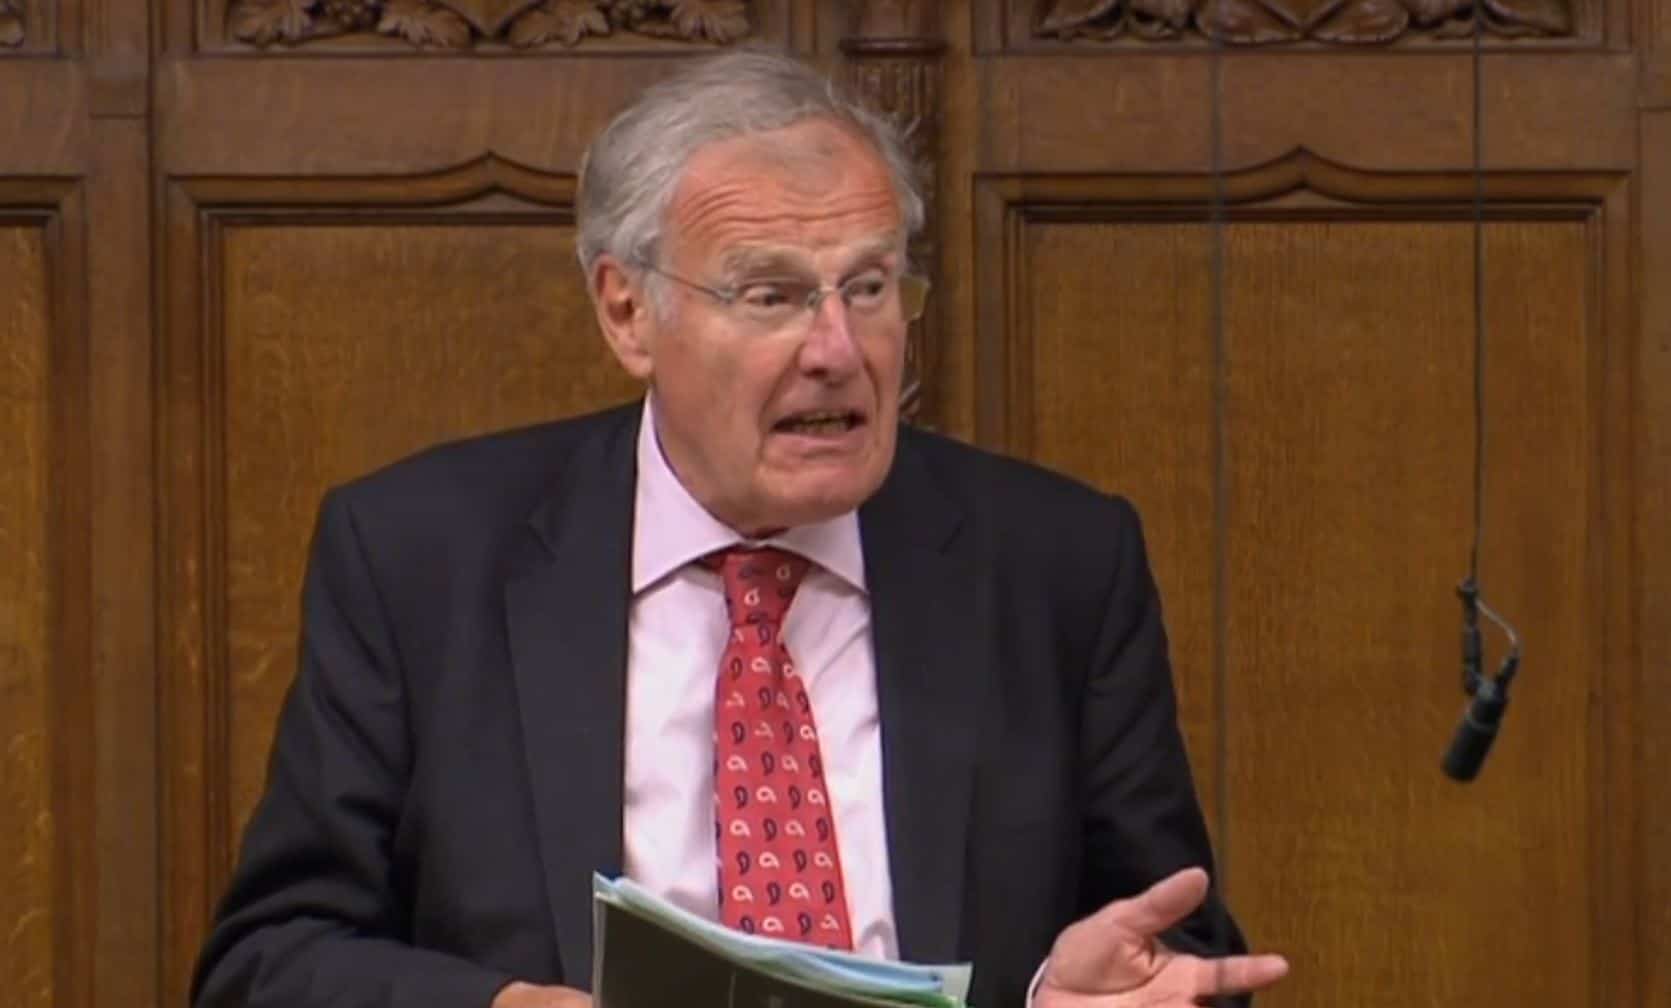 The Tory MP who tried to block upskirting bill is scared Christianity is ‘on the decline’